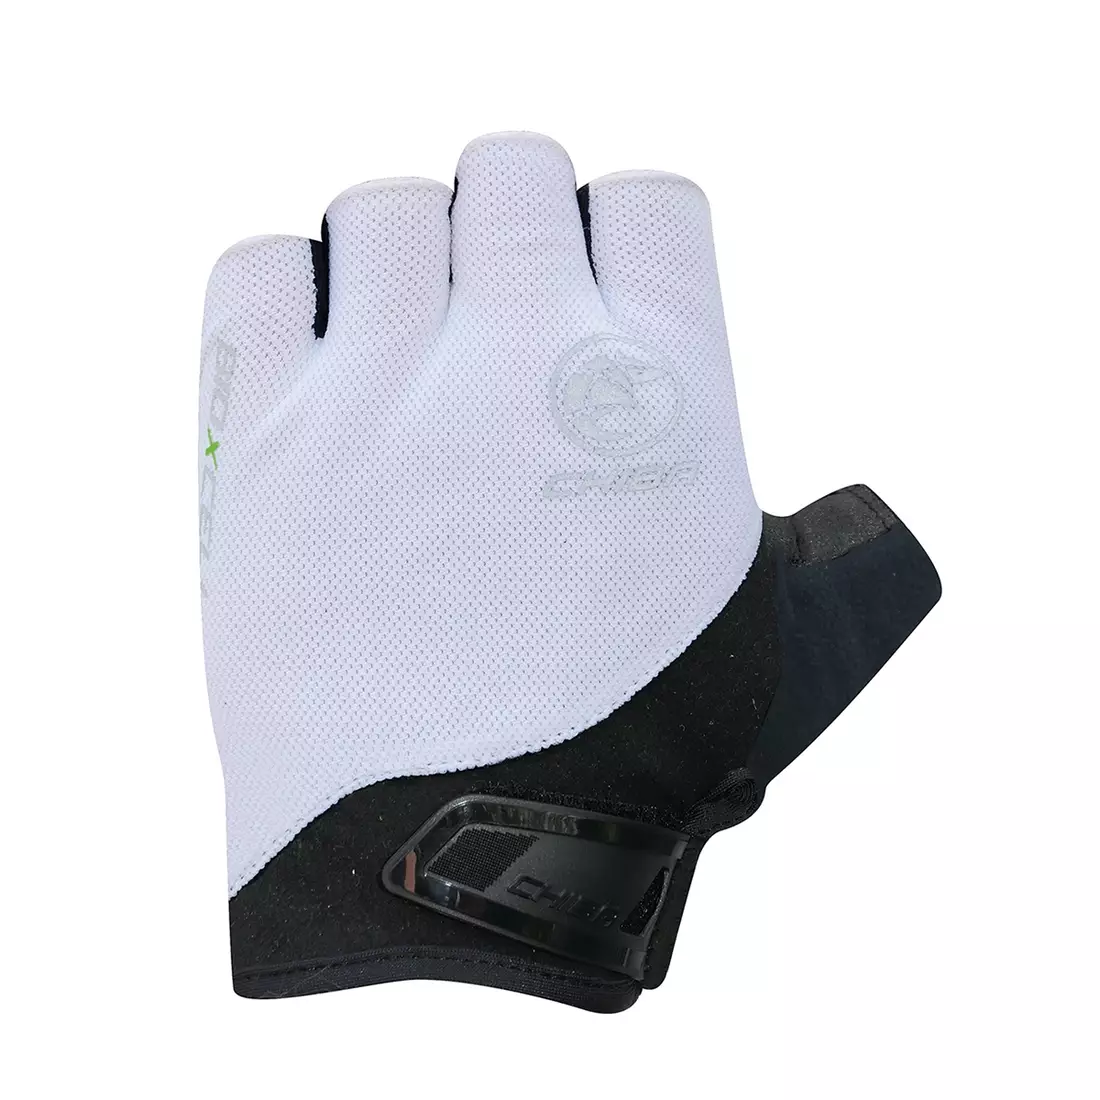 CHIBA BIOXCELL ROAD cycling gloves, black and white